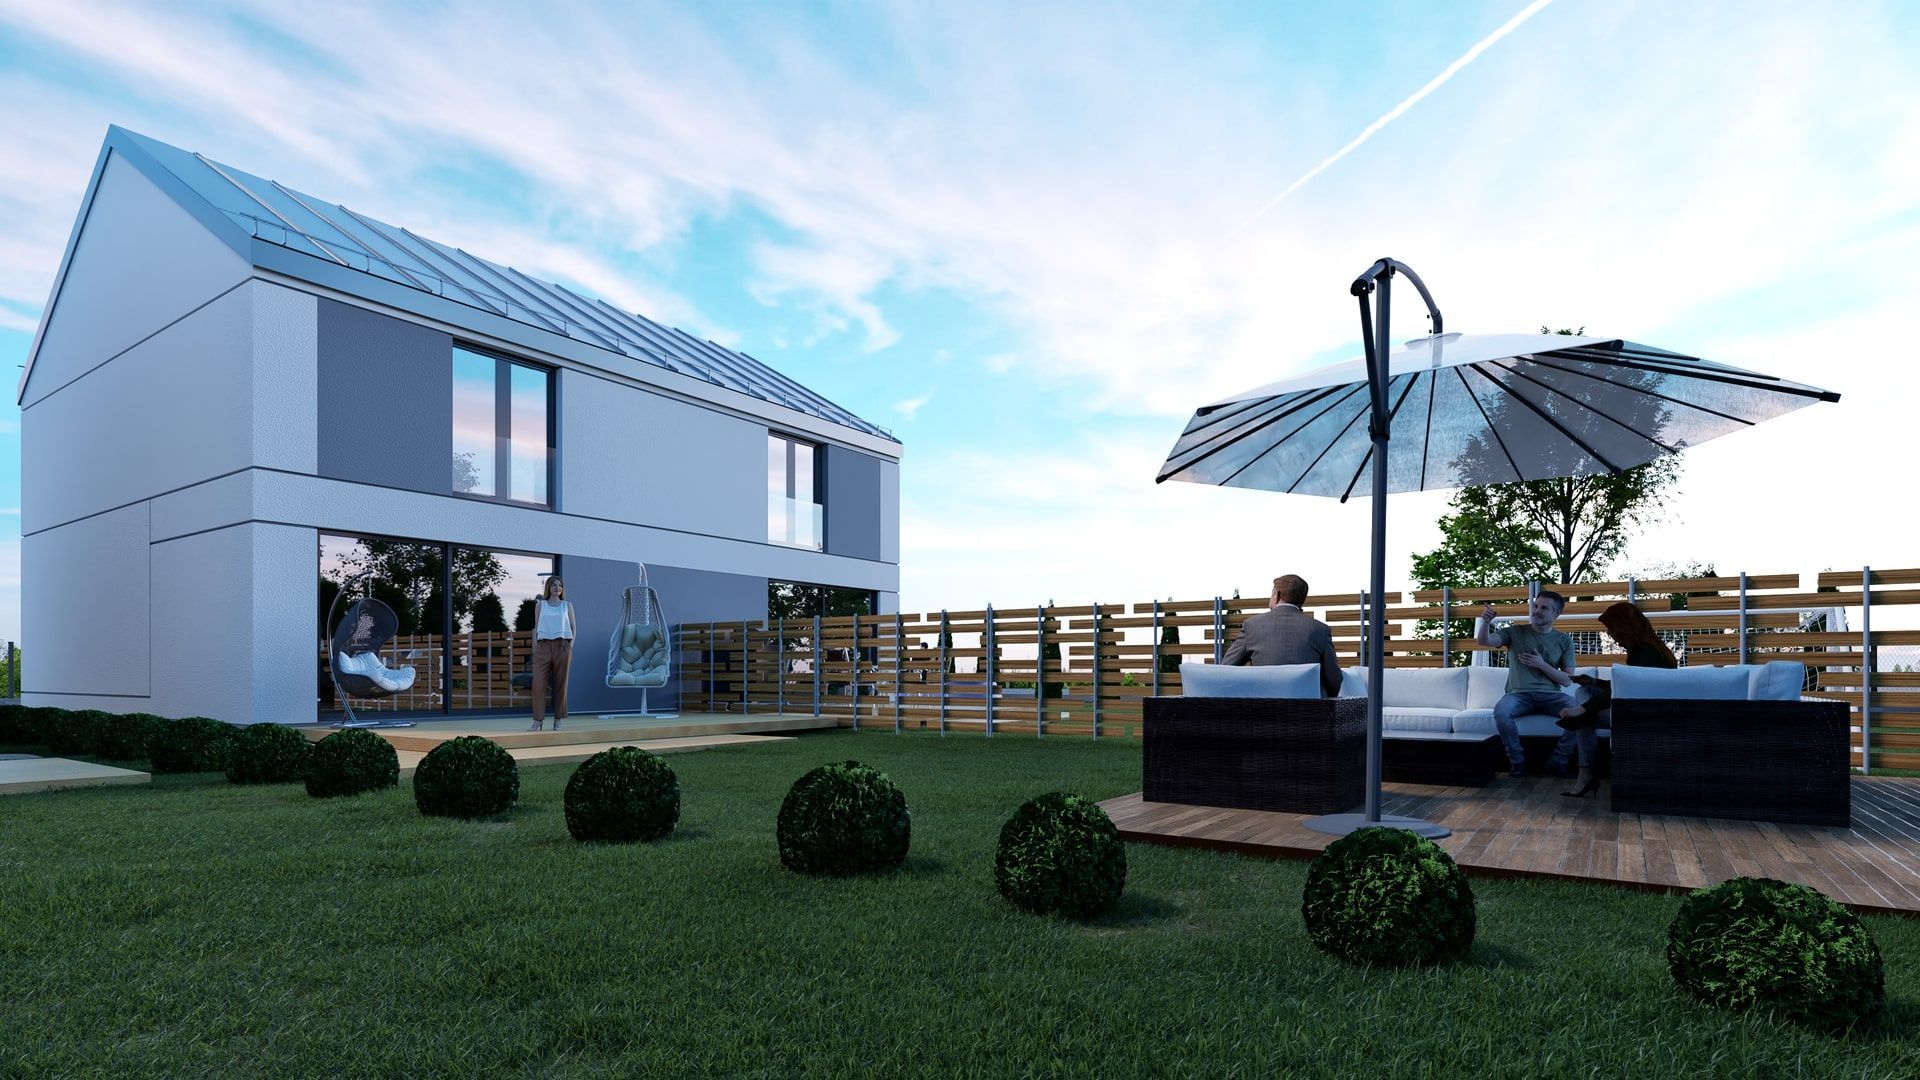 3D visualizations - Gliwice - Projects